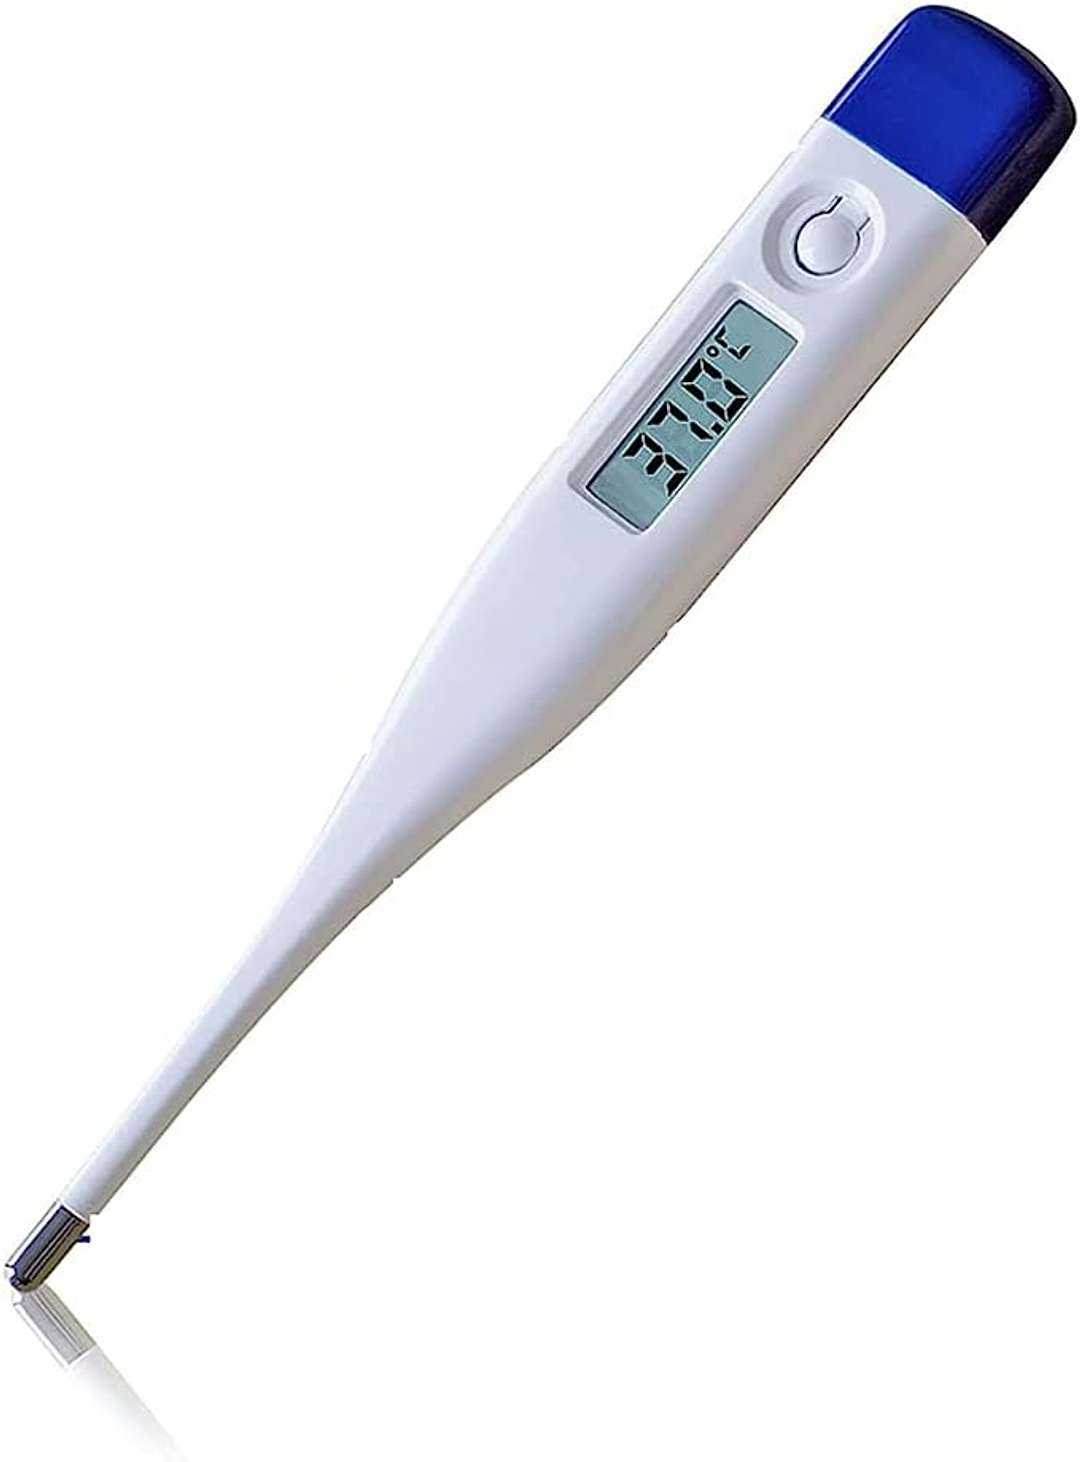 ClinPro Digital Thermometer